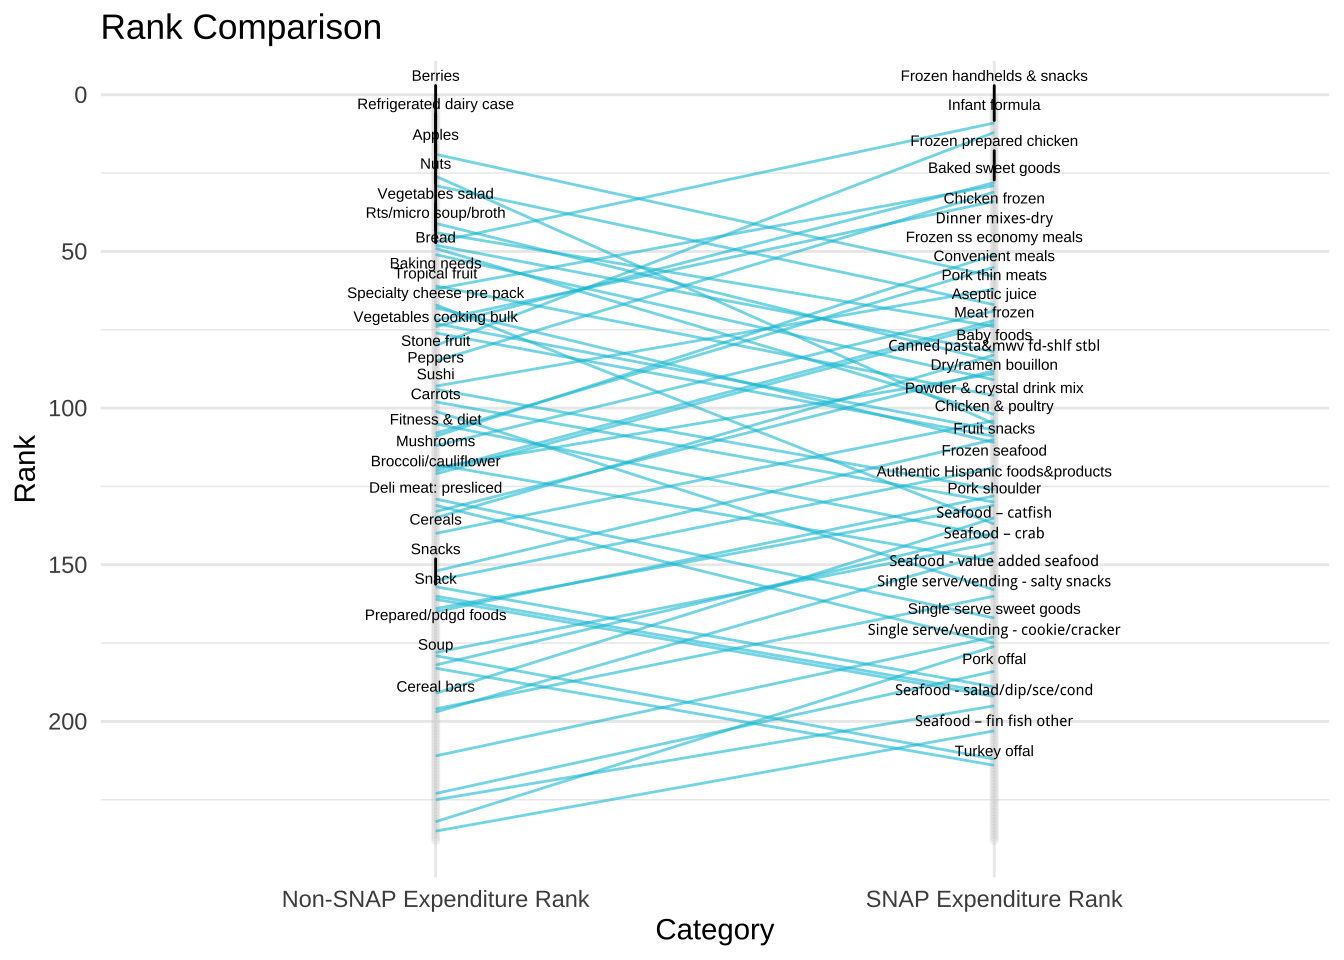 Line plot showing difference in rank by families served and not served by SNAP